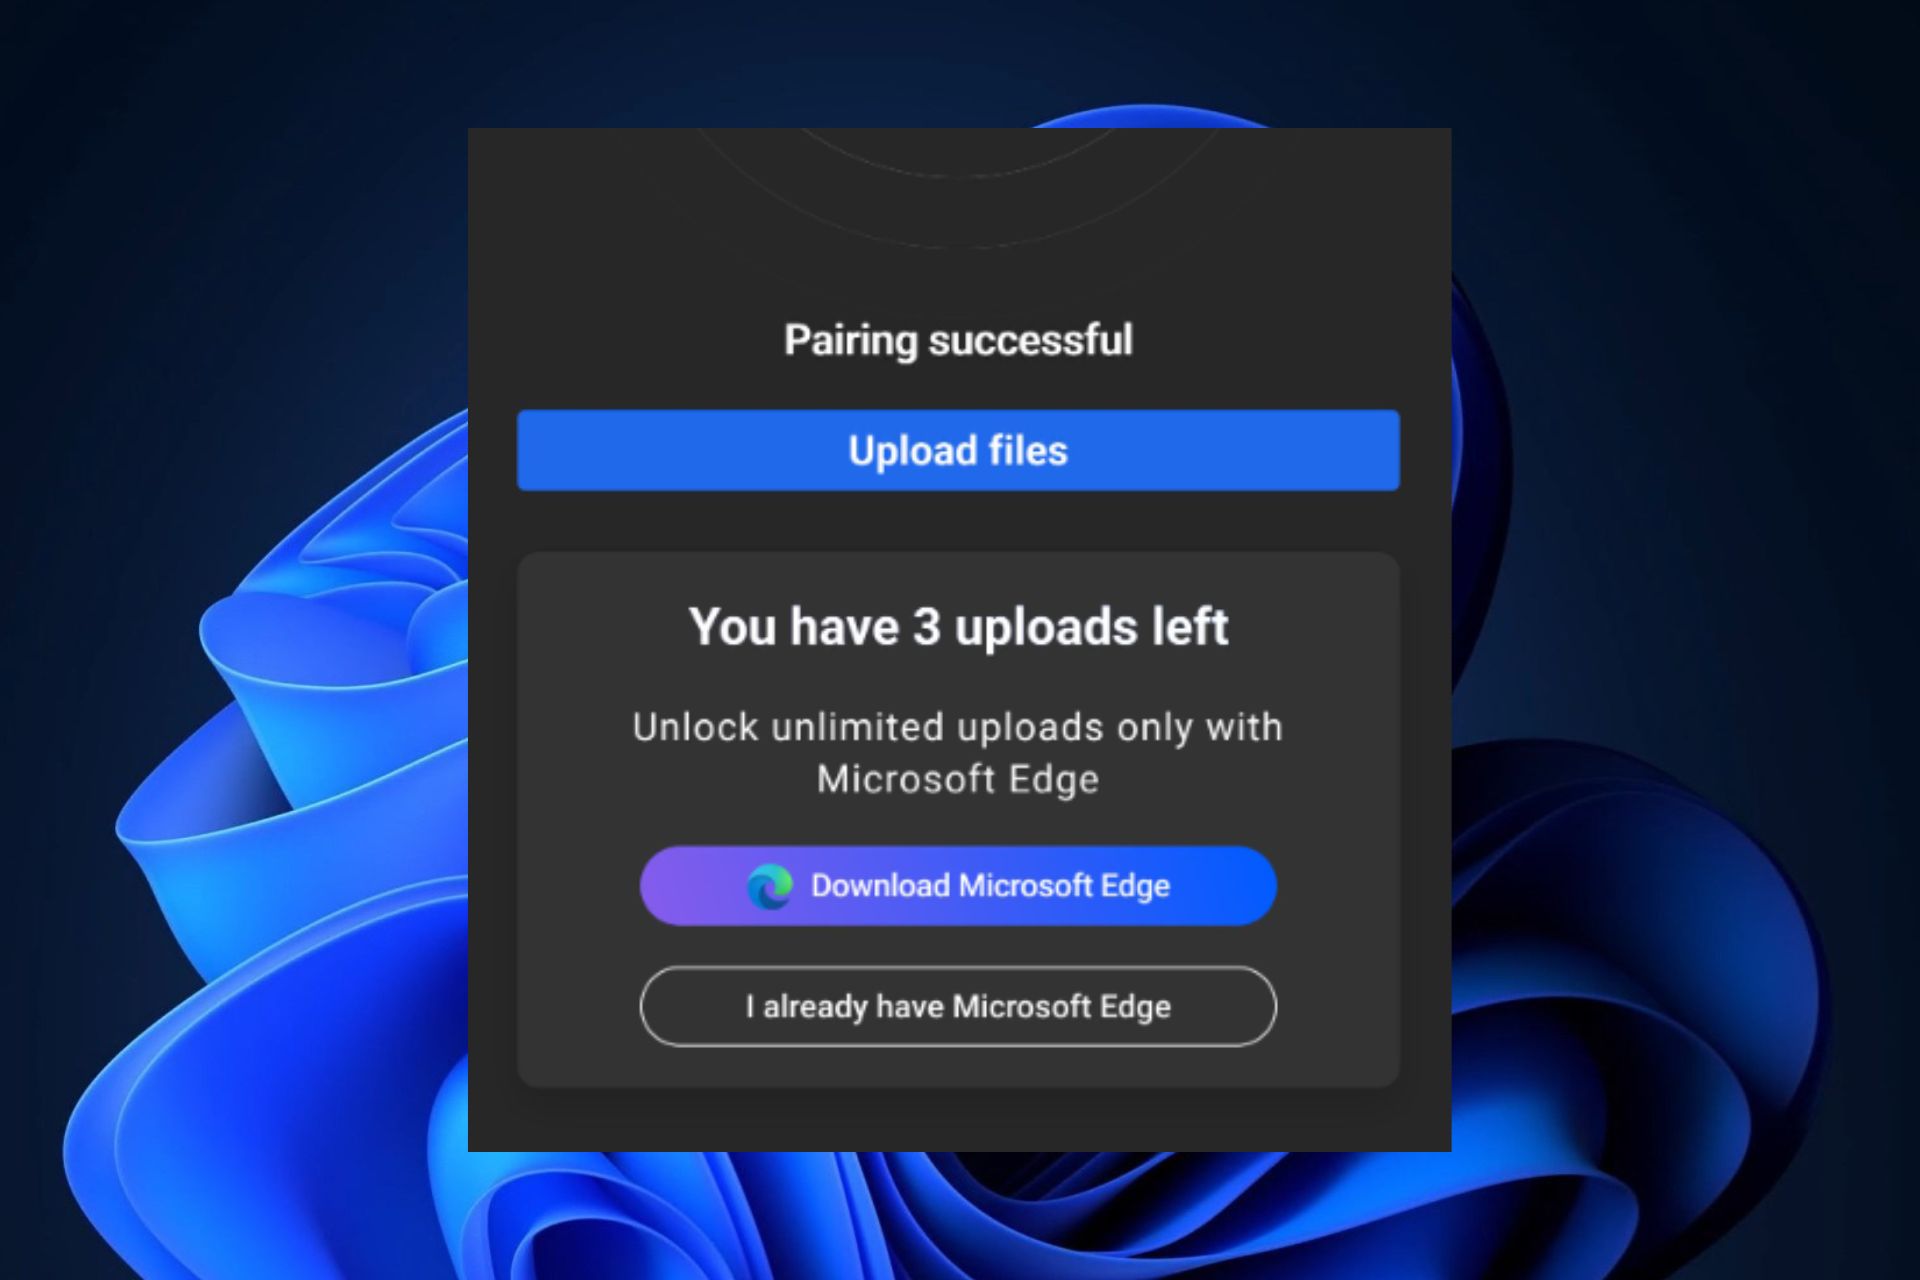 microsoft edge upload from mobile